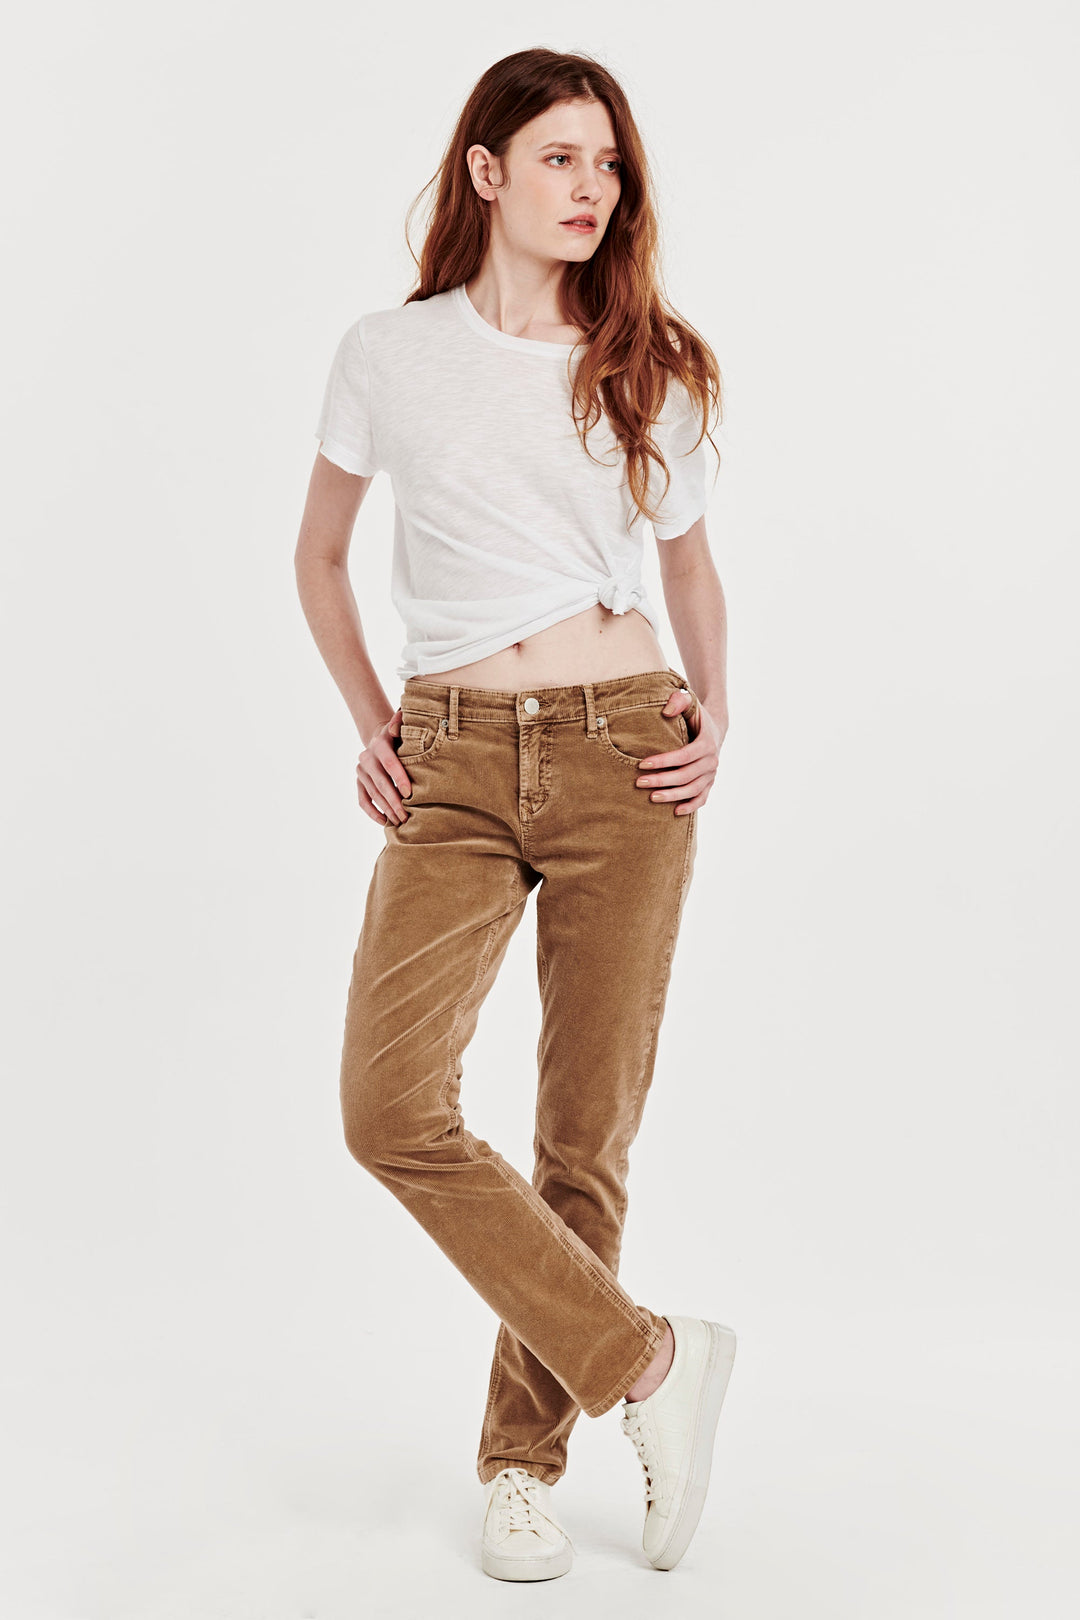 BLAIRE HIGH RISE ANKLE SLIM STRAIGHT CORDUROY PANTS SHELL